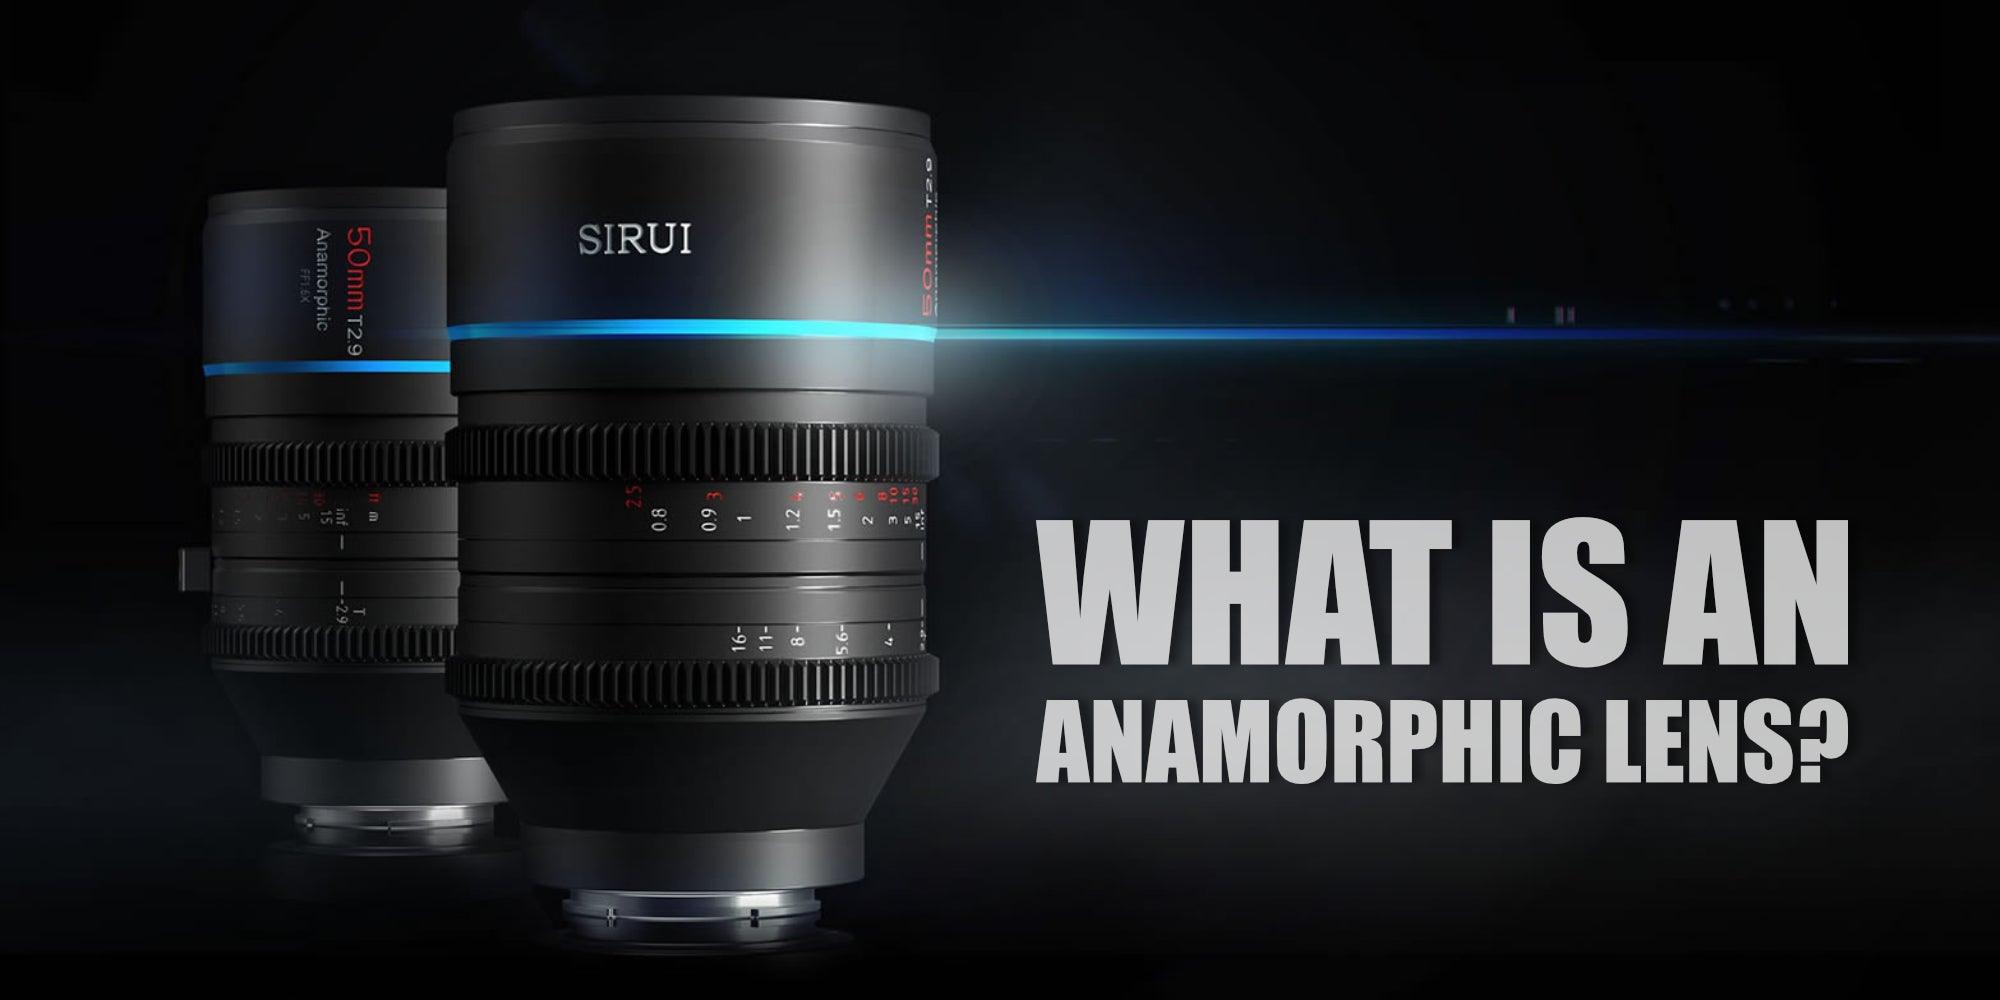 Image of a lens. Text says what is an anamorphic lens